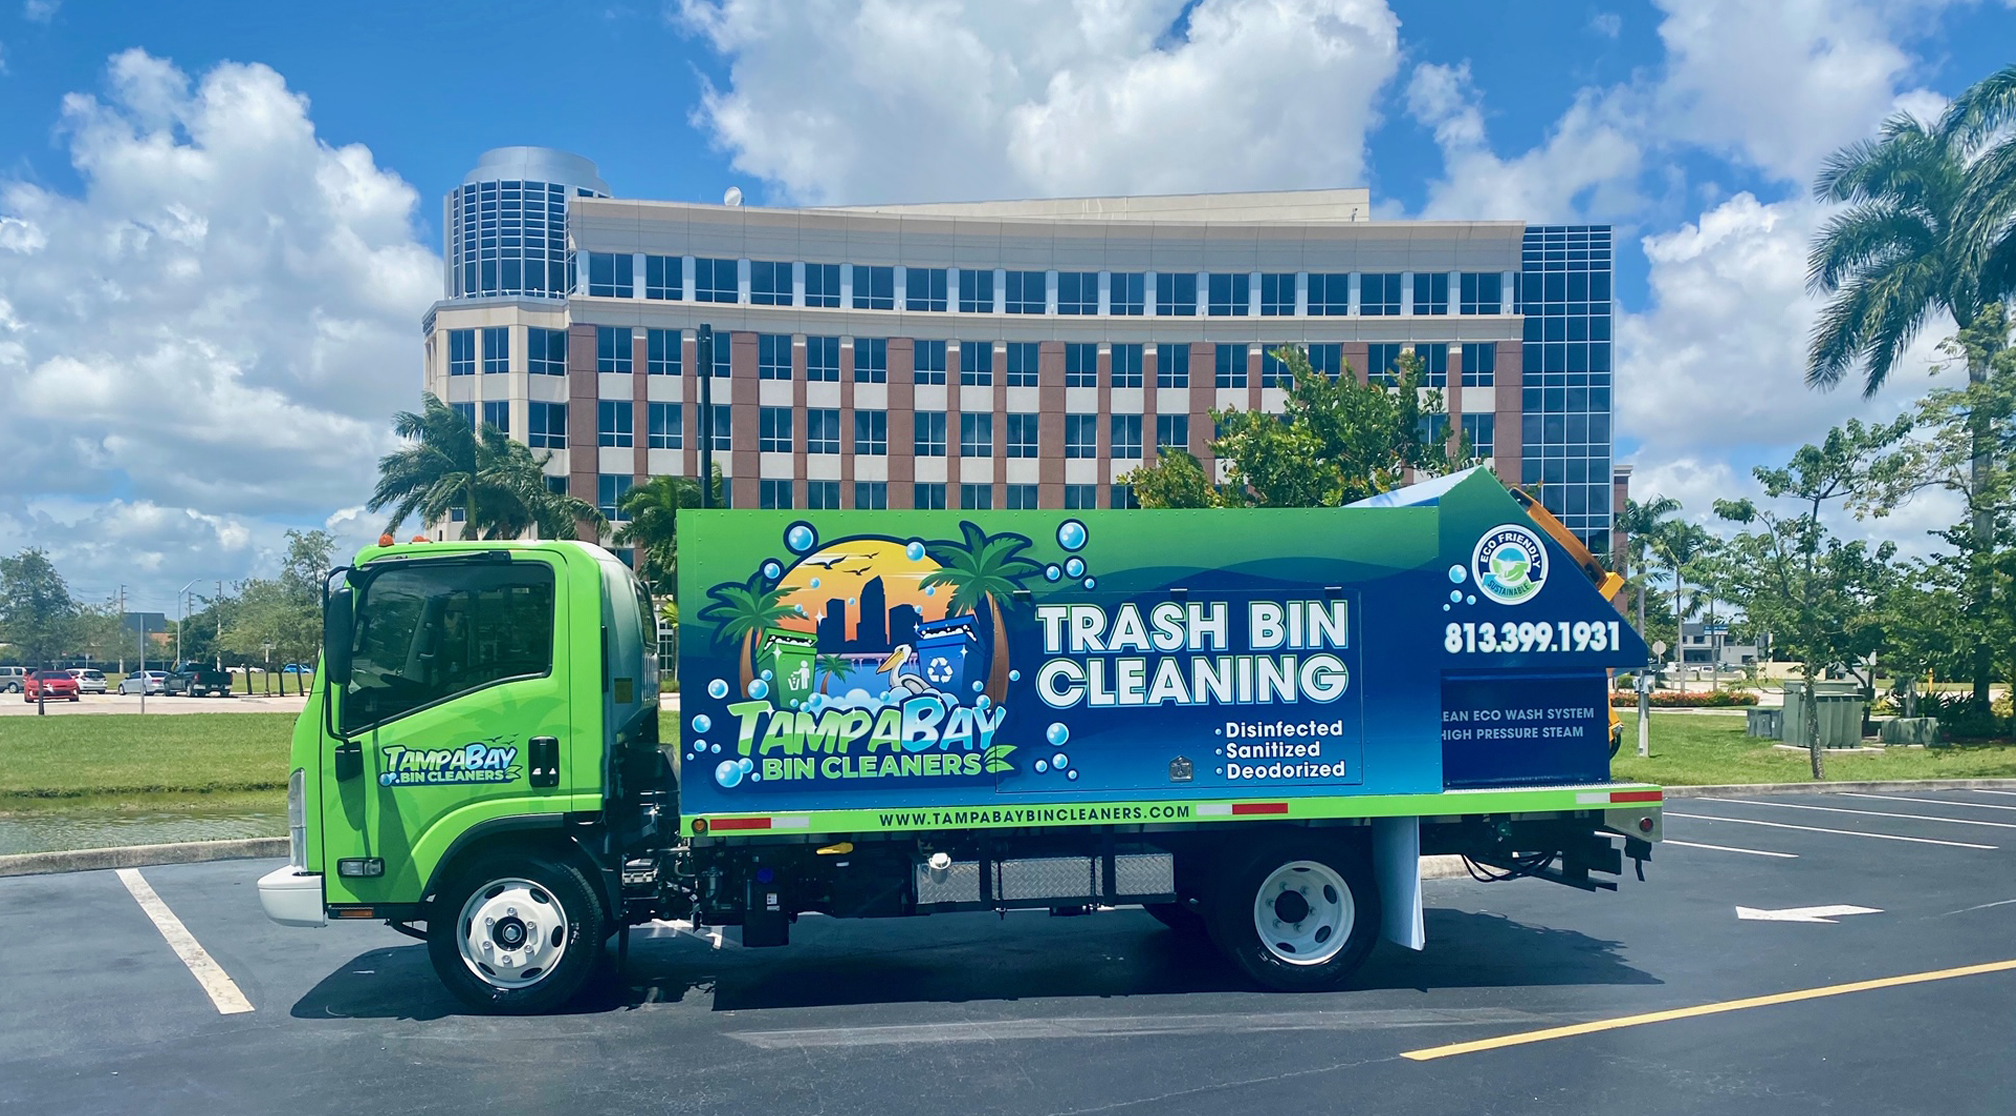 images/TAMPA_BAY_BIN_CLEANING_SERVICES_2.jpg